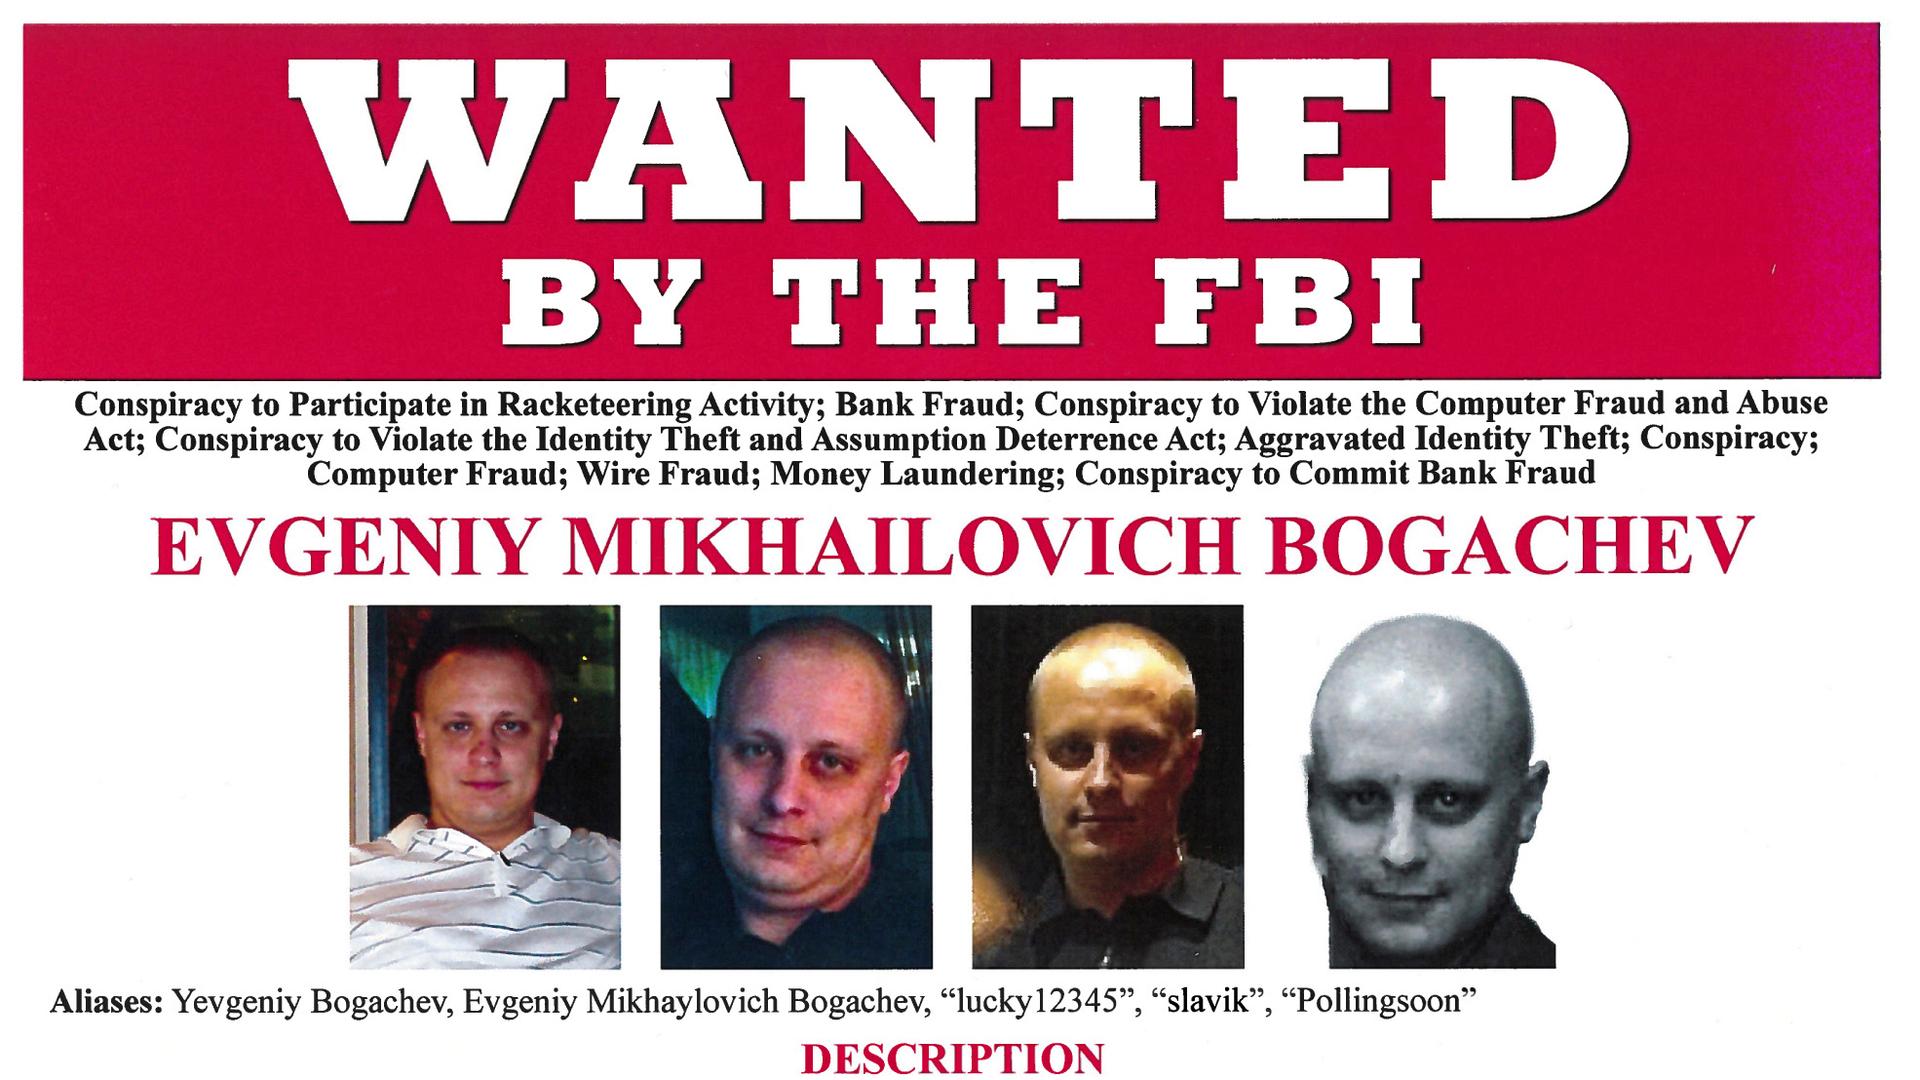 Russian national Evengiy Bogachev is shown in this Federal Bureau of Investigation (FBI) Wanted Poster in this handout provided by the FBI in Washington, DC, February 24, 2015.